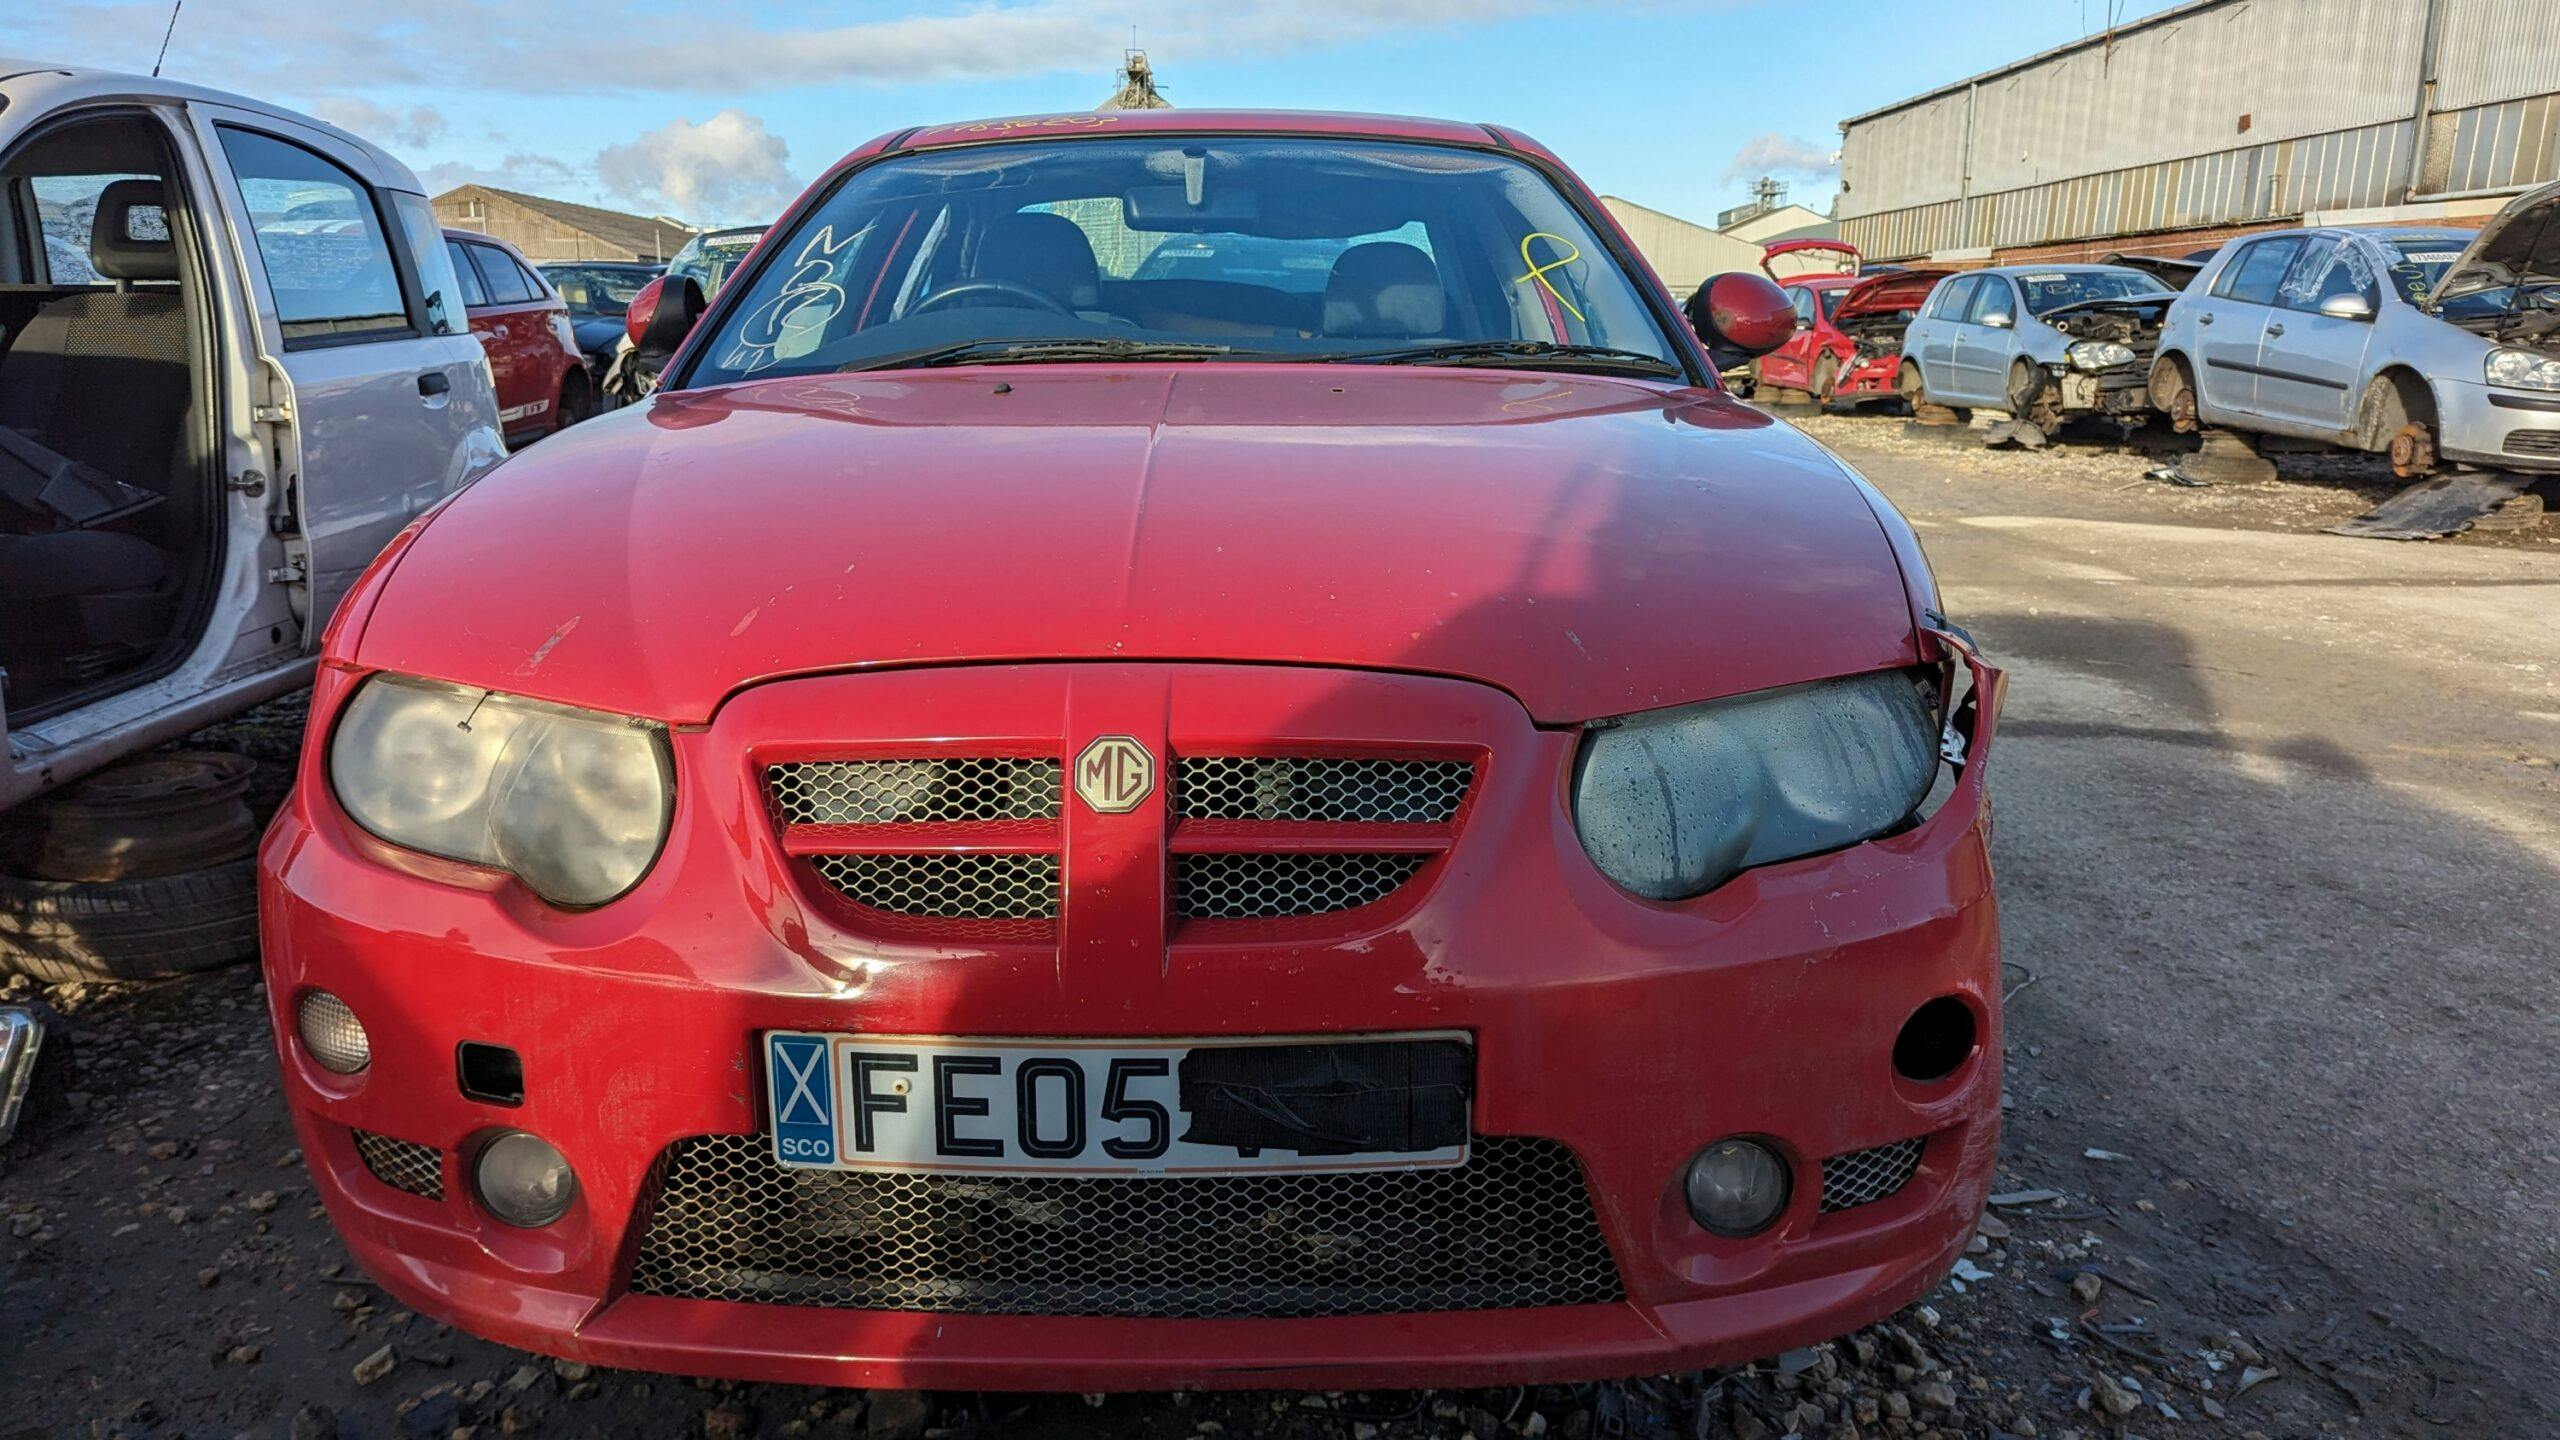 2005 MG ZT 190 front